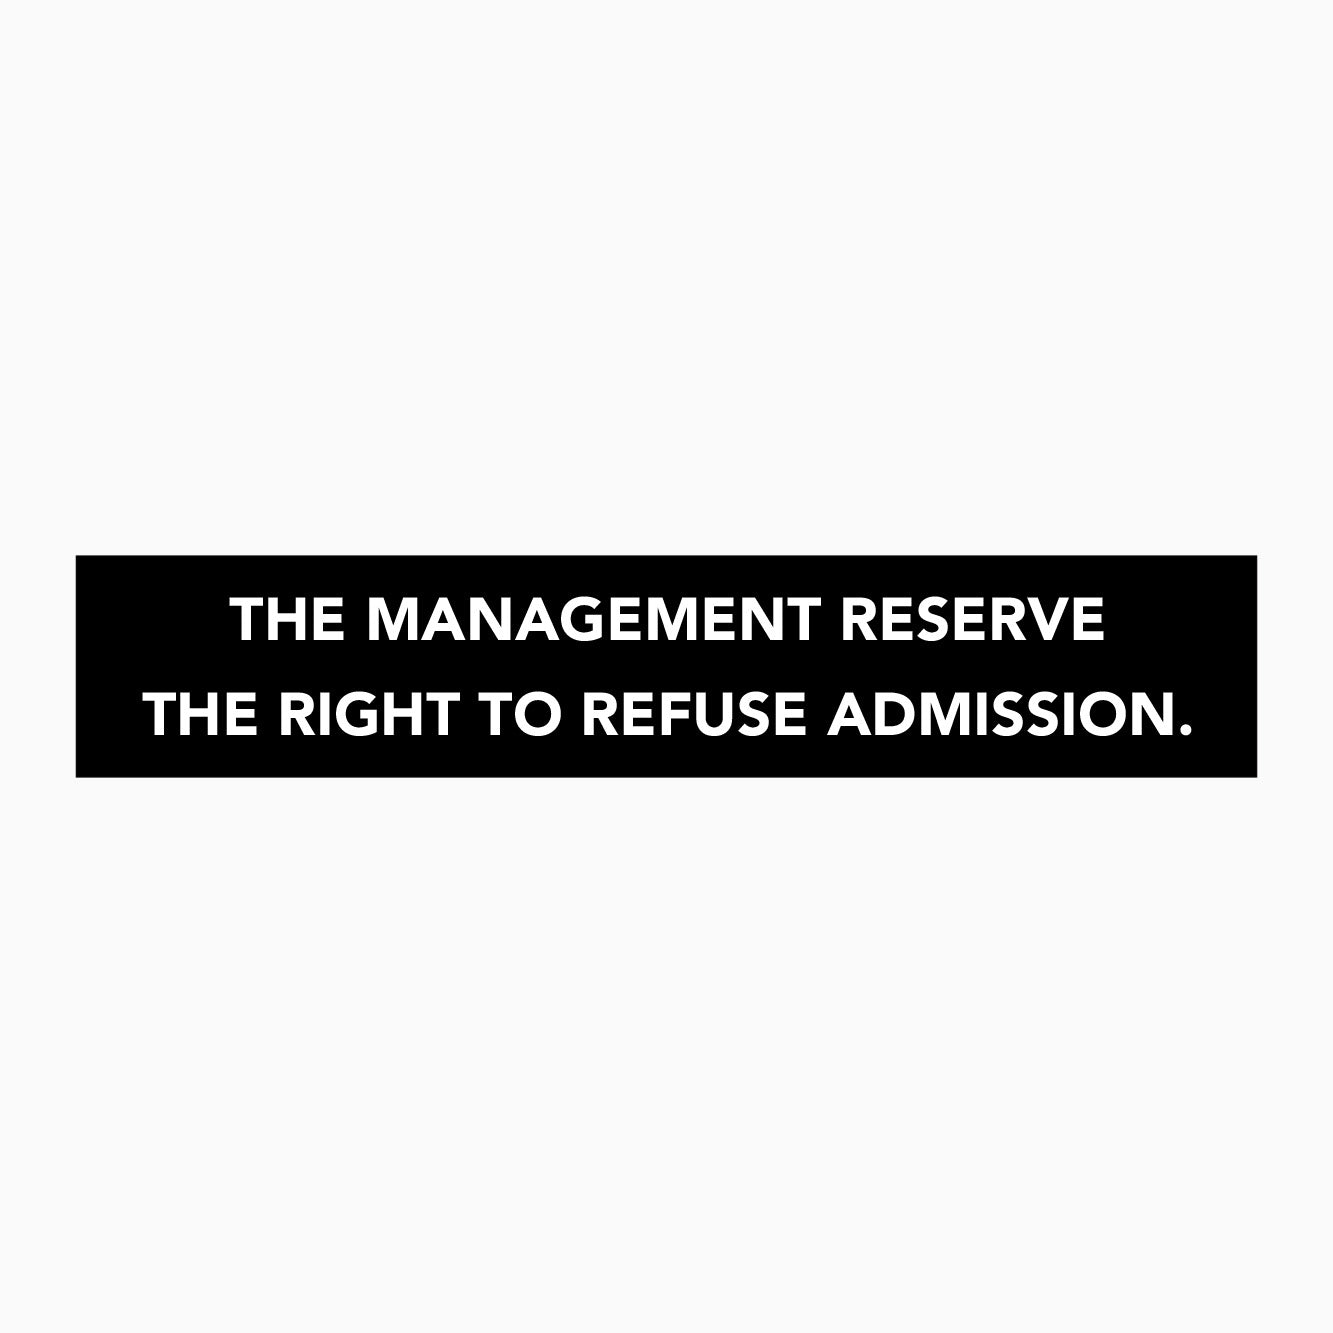 THE MANAGEMENT RESERVE THE RIGHT TO REFUSE ADMISSION SIGN